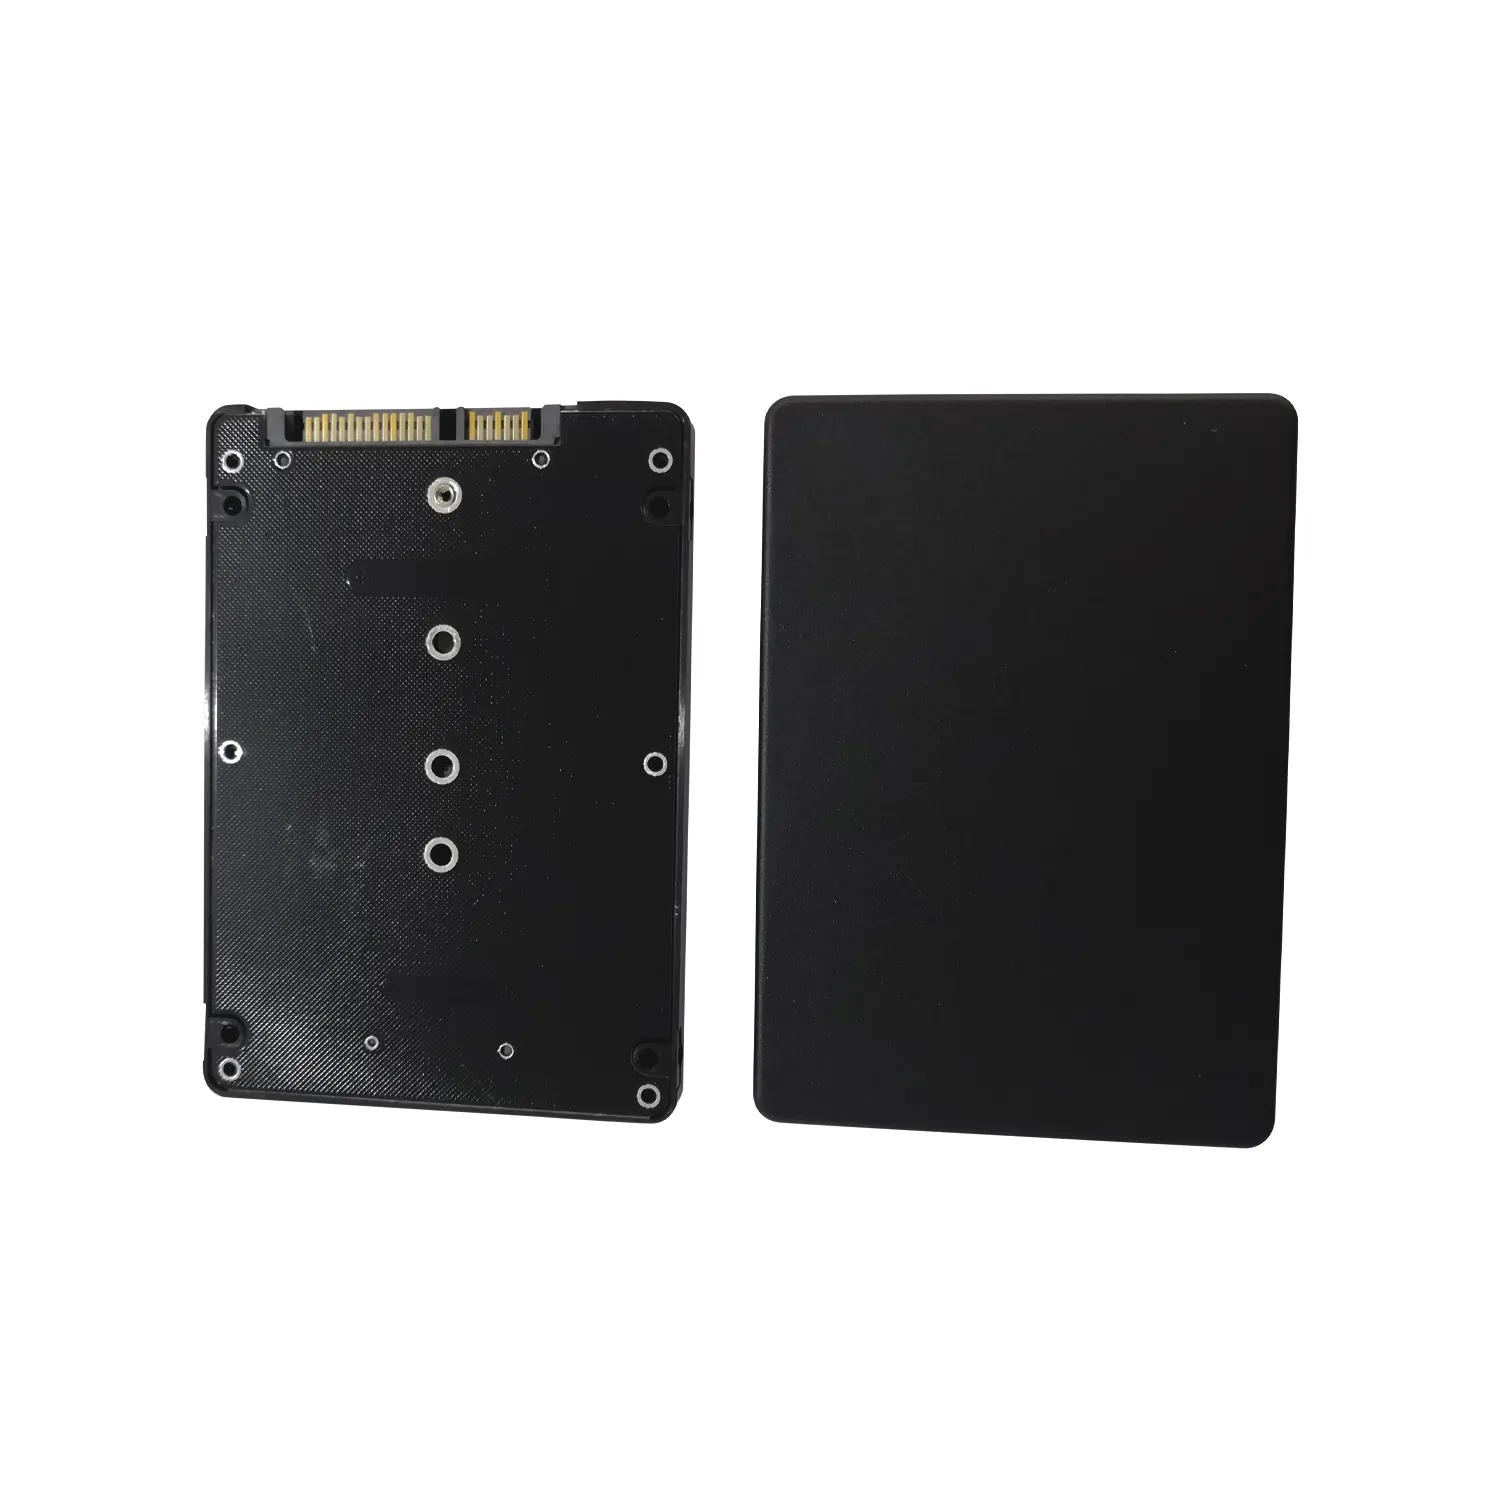 2.5'' Sata III To M2 NGFF SSD Converter Adapter Card M.2 to 2.5 Inch Sata 3 Riser Card Connector